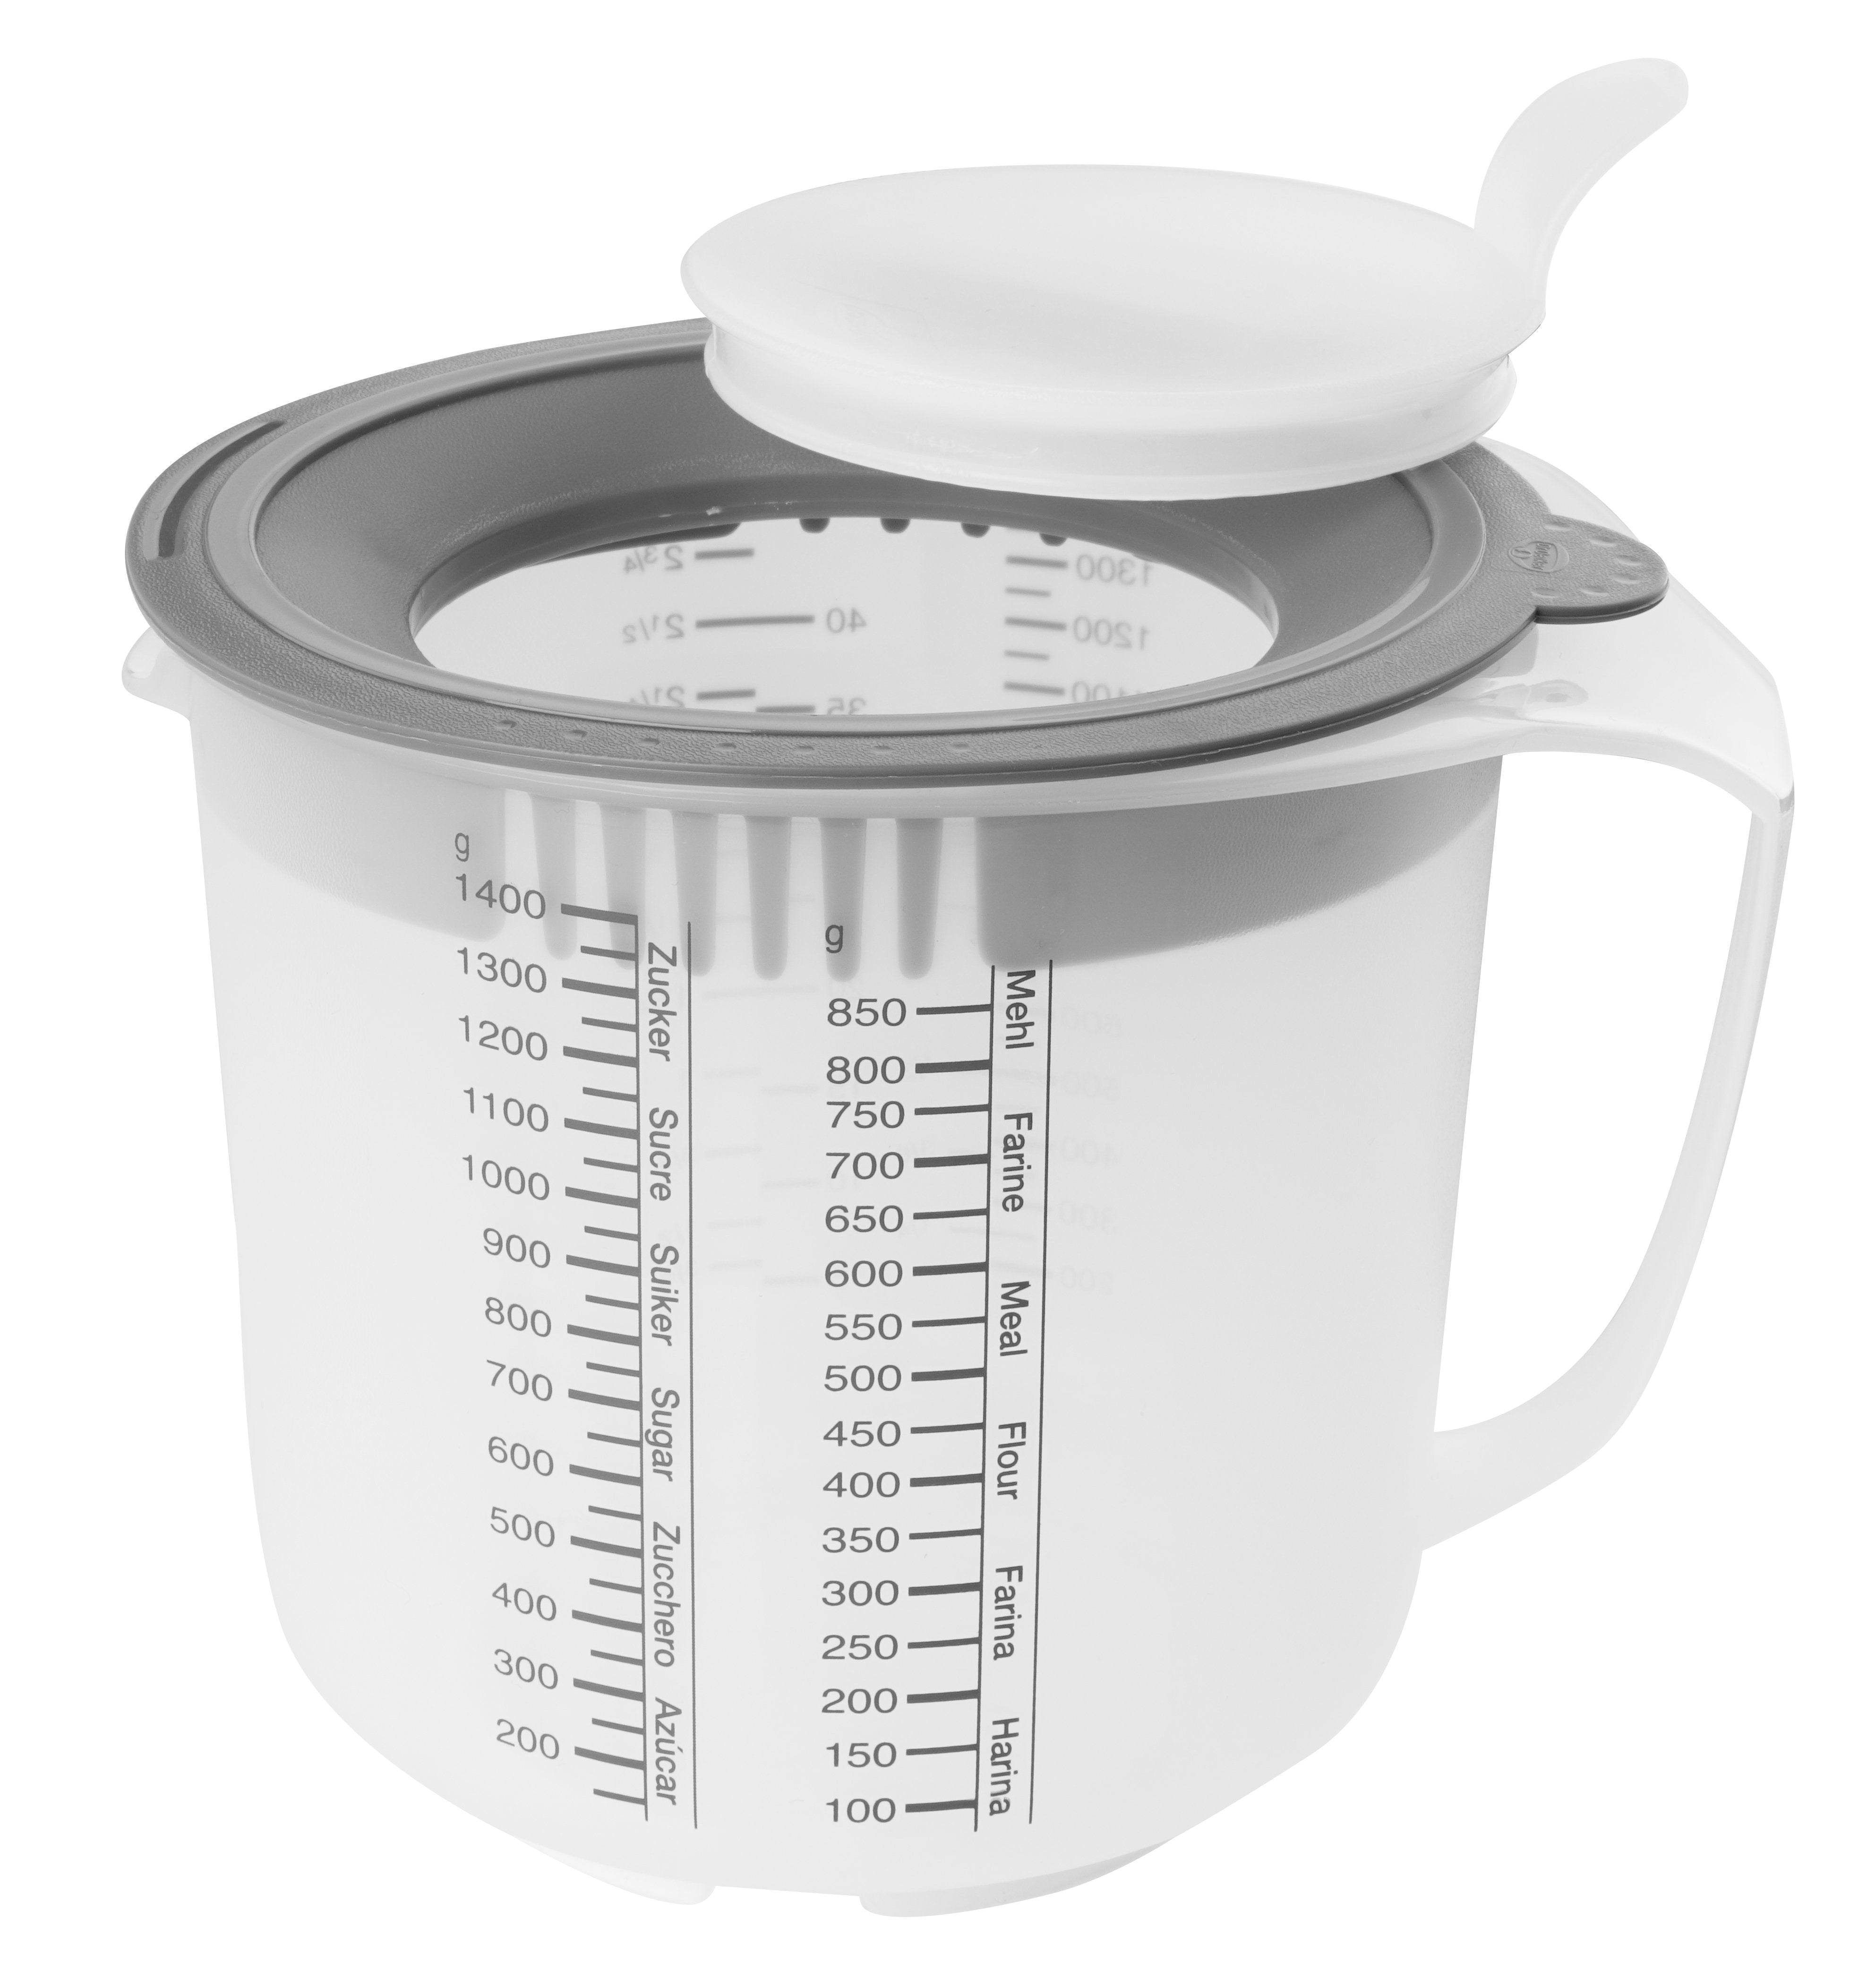 Dr.Oetker Measuring And Mixing Bowl, 15X14.5 cm - Whole and All